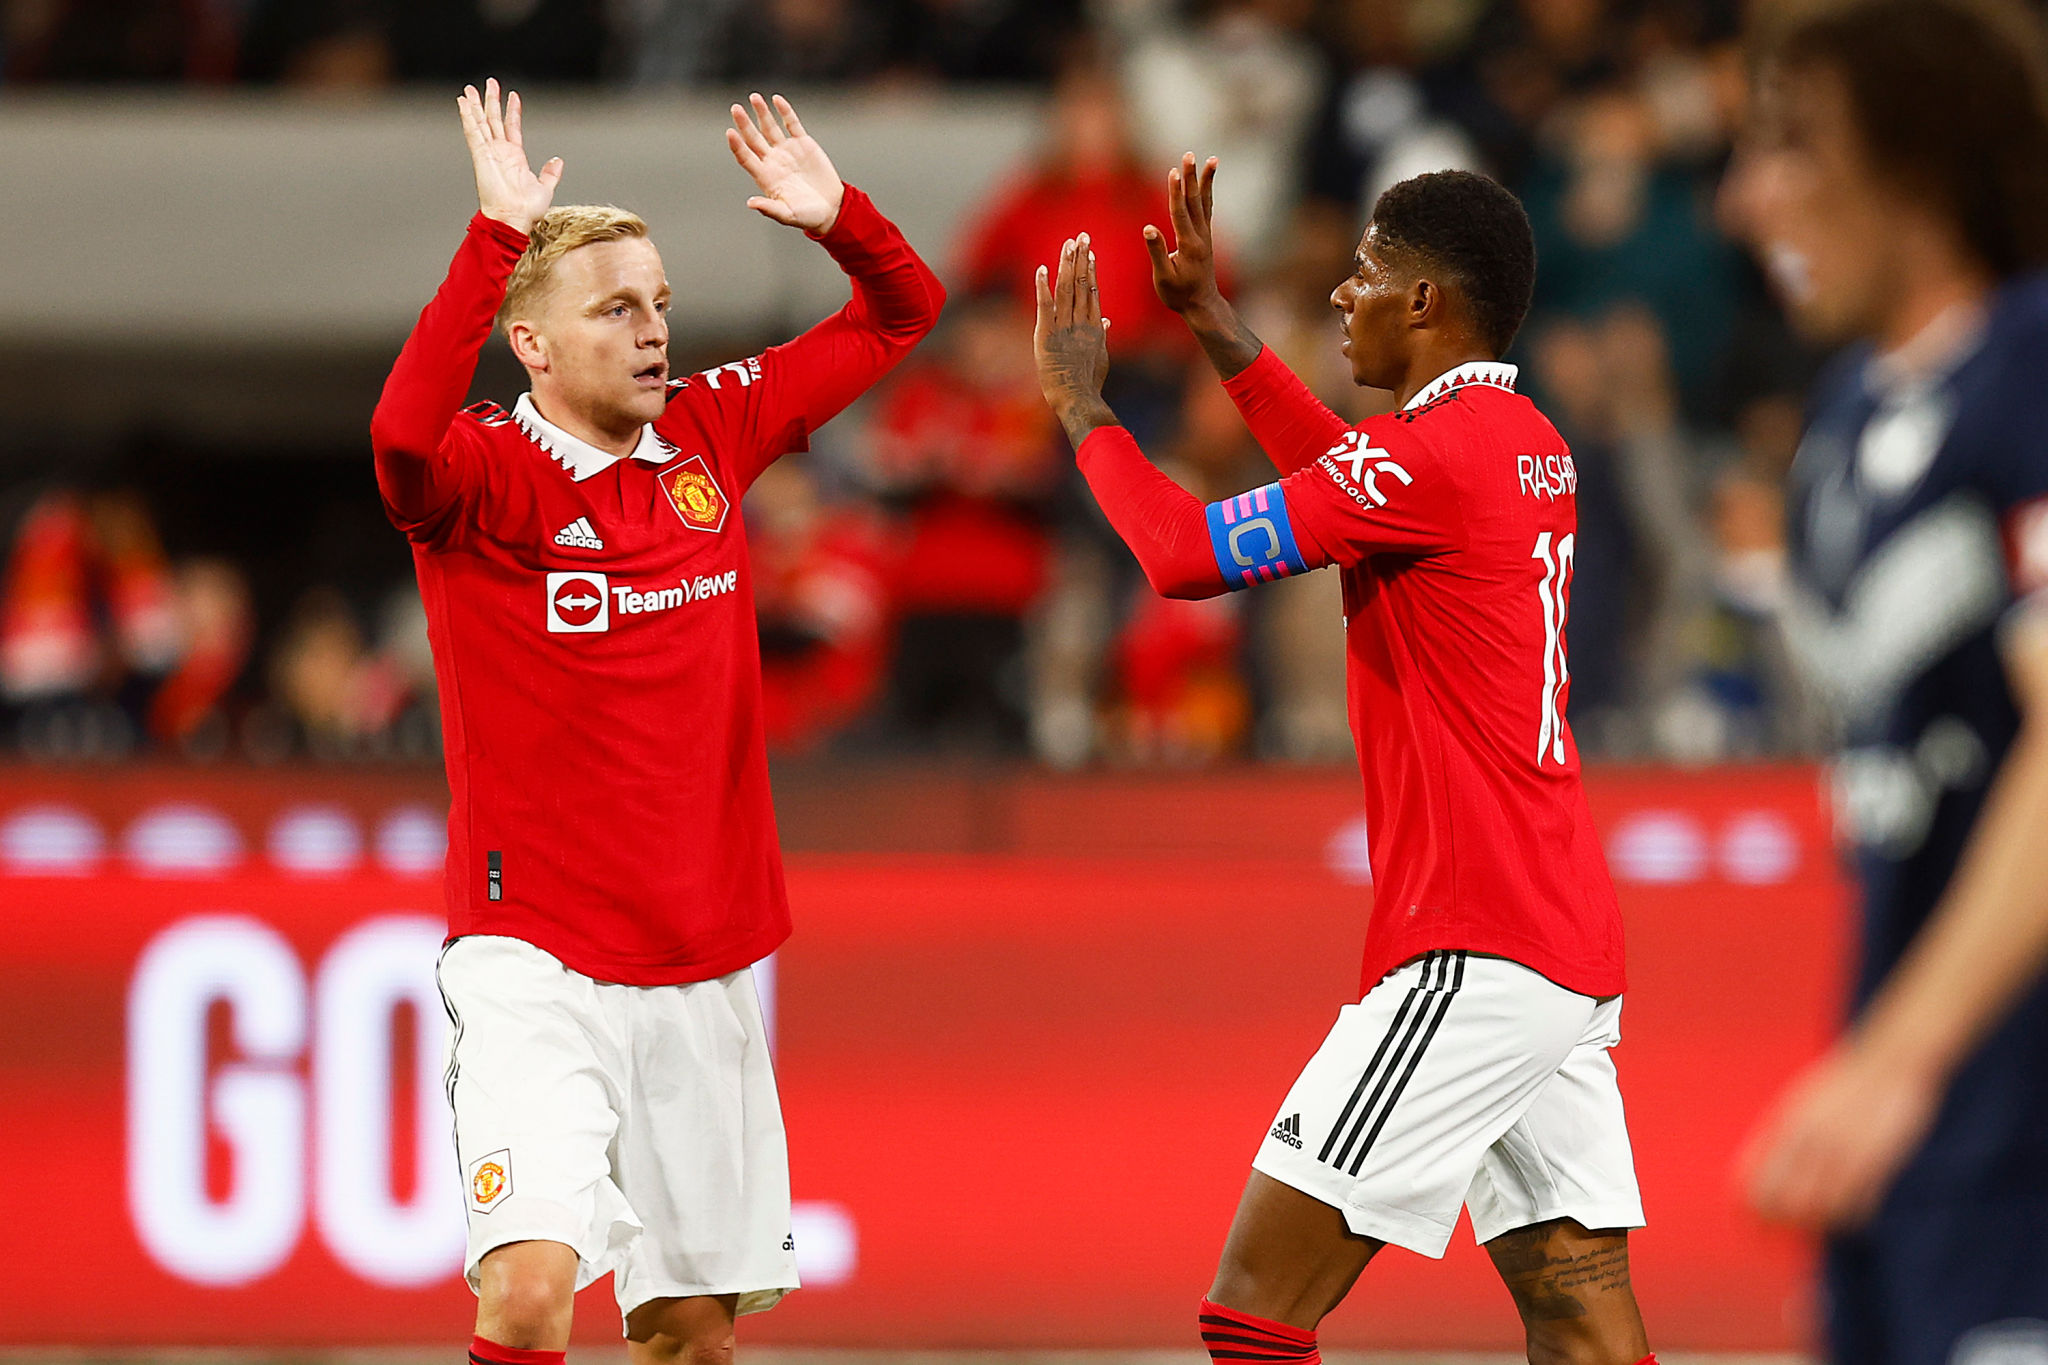 Melbourne Victory vs Man United: United wins 4-1: Goals from Martial, McTominay and Rashford seals second Pre-Season victory for Erik ten Hag, Check Manchester United beat Melbourne Victory HIGHLIGHTS